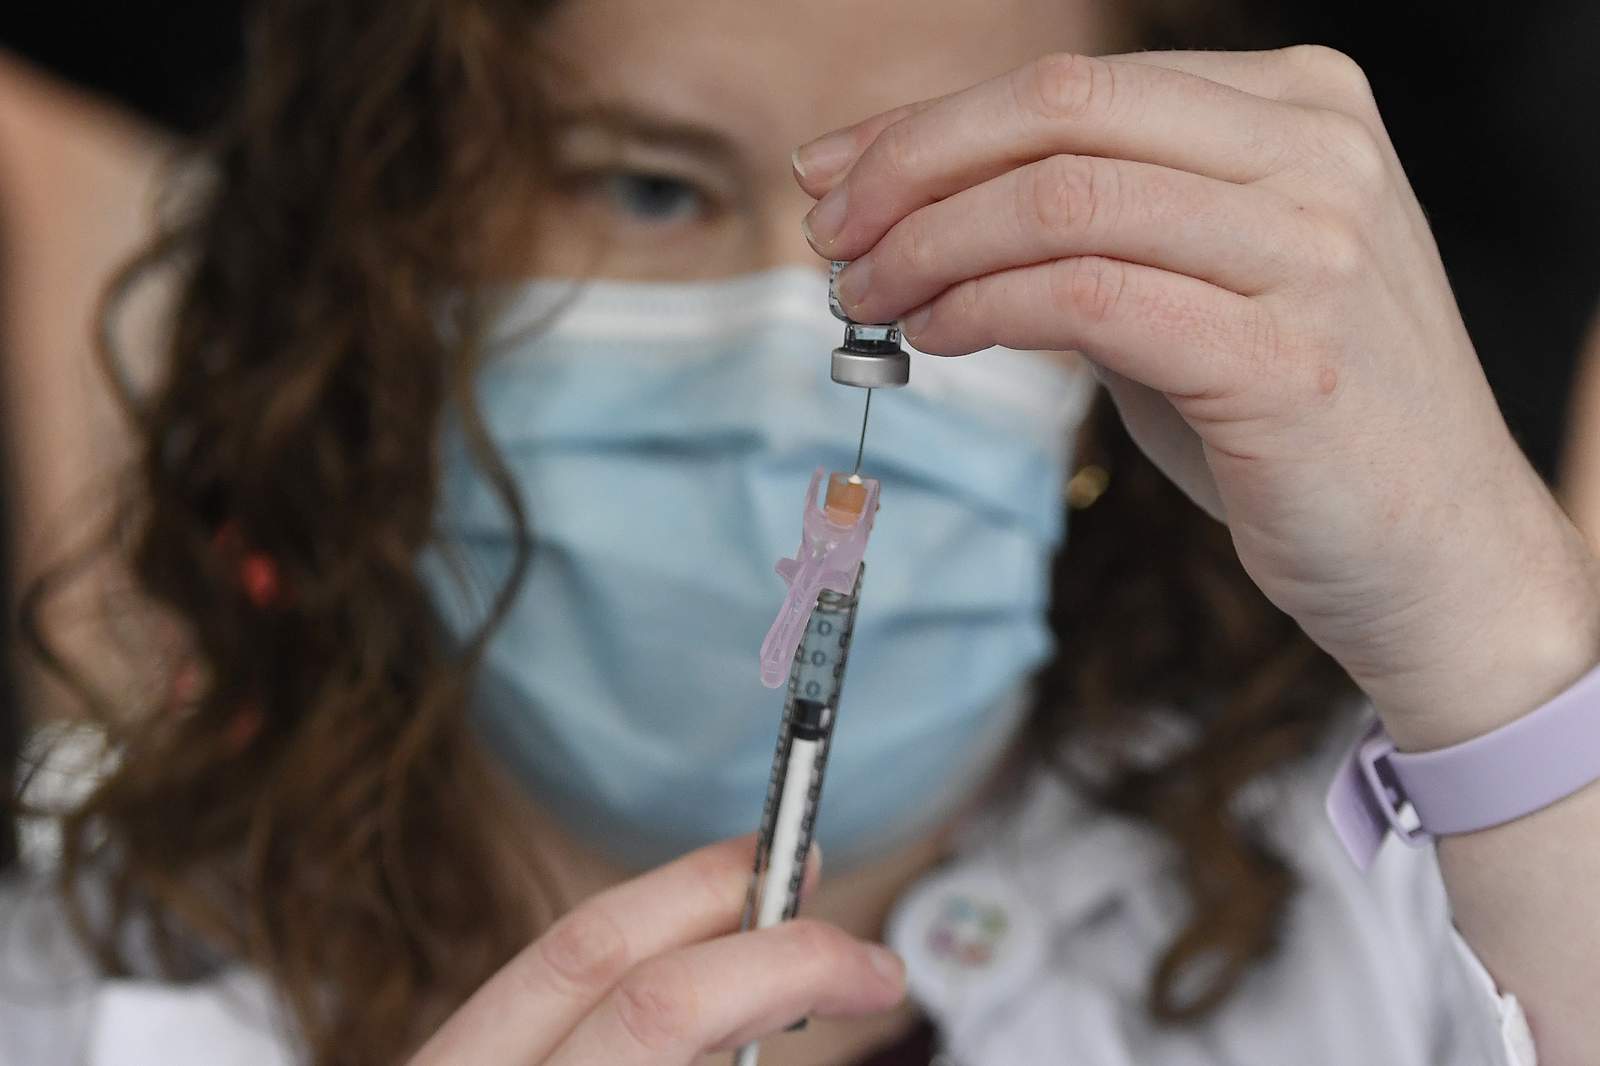 Vaccine comes too late for the 300,000 dead in the U.S.